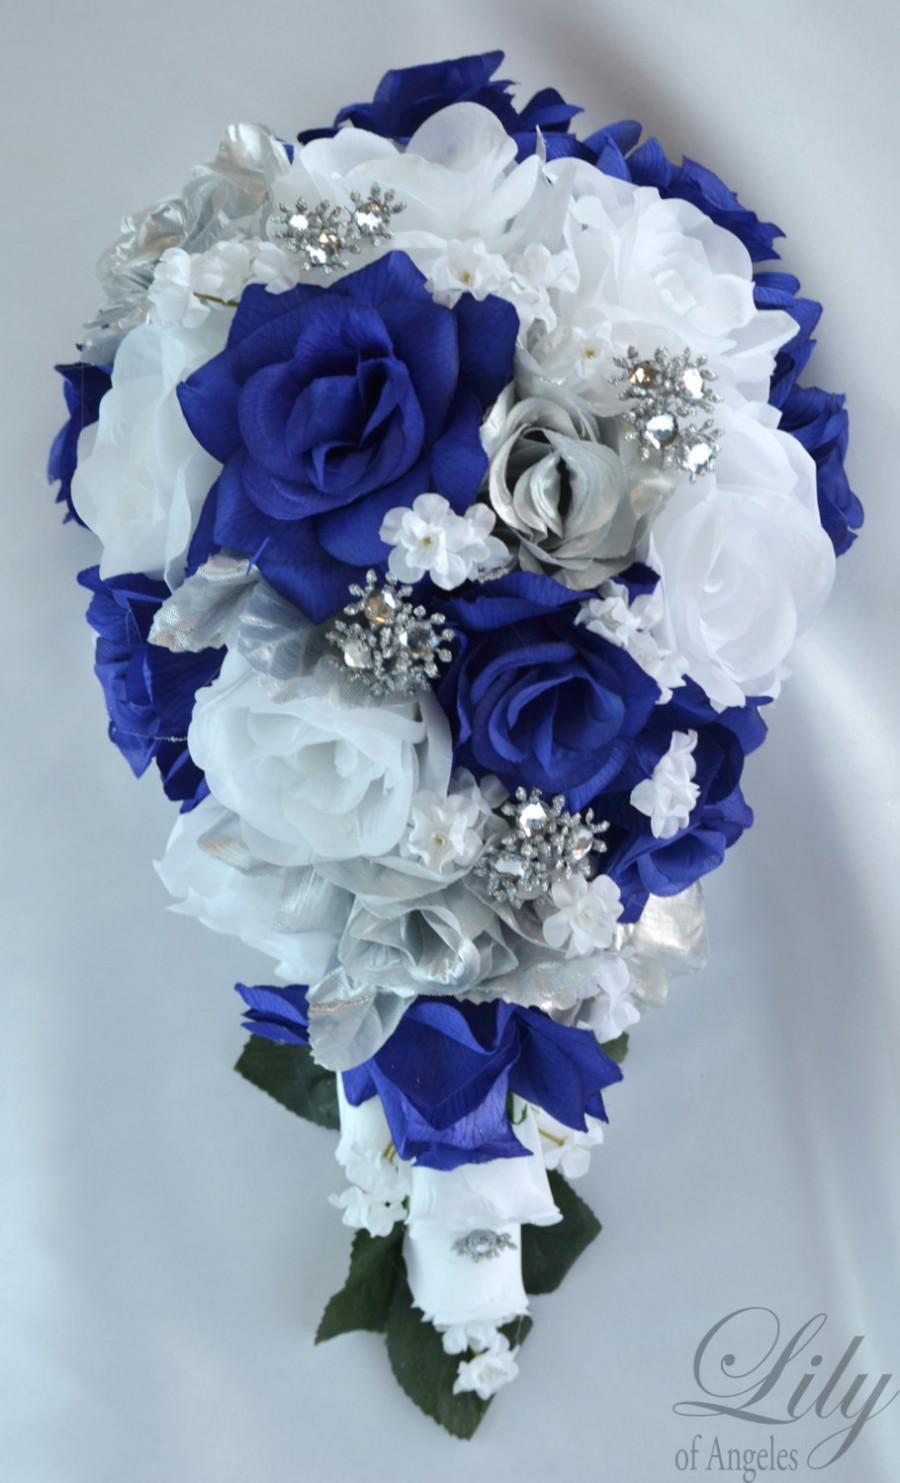 Свадьба - 17 Piece Package Wedding Cascade Bouquet Bride Silk Flowers Bridal Bouquets Decorations Teardrop Navy BLUE SILVER "Lily of Angeles" BLSI01